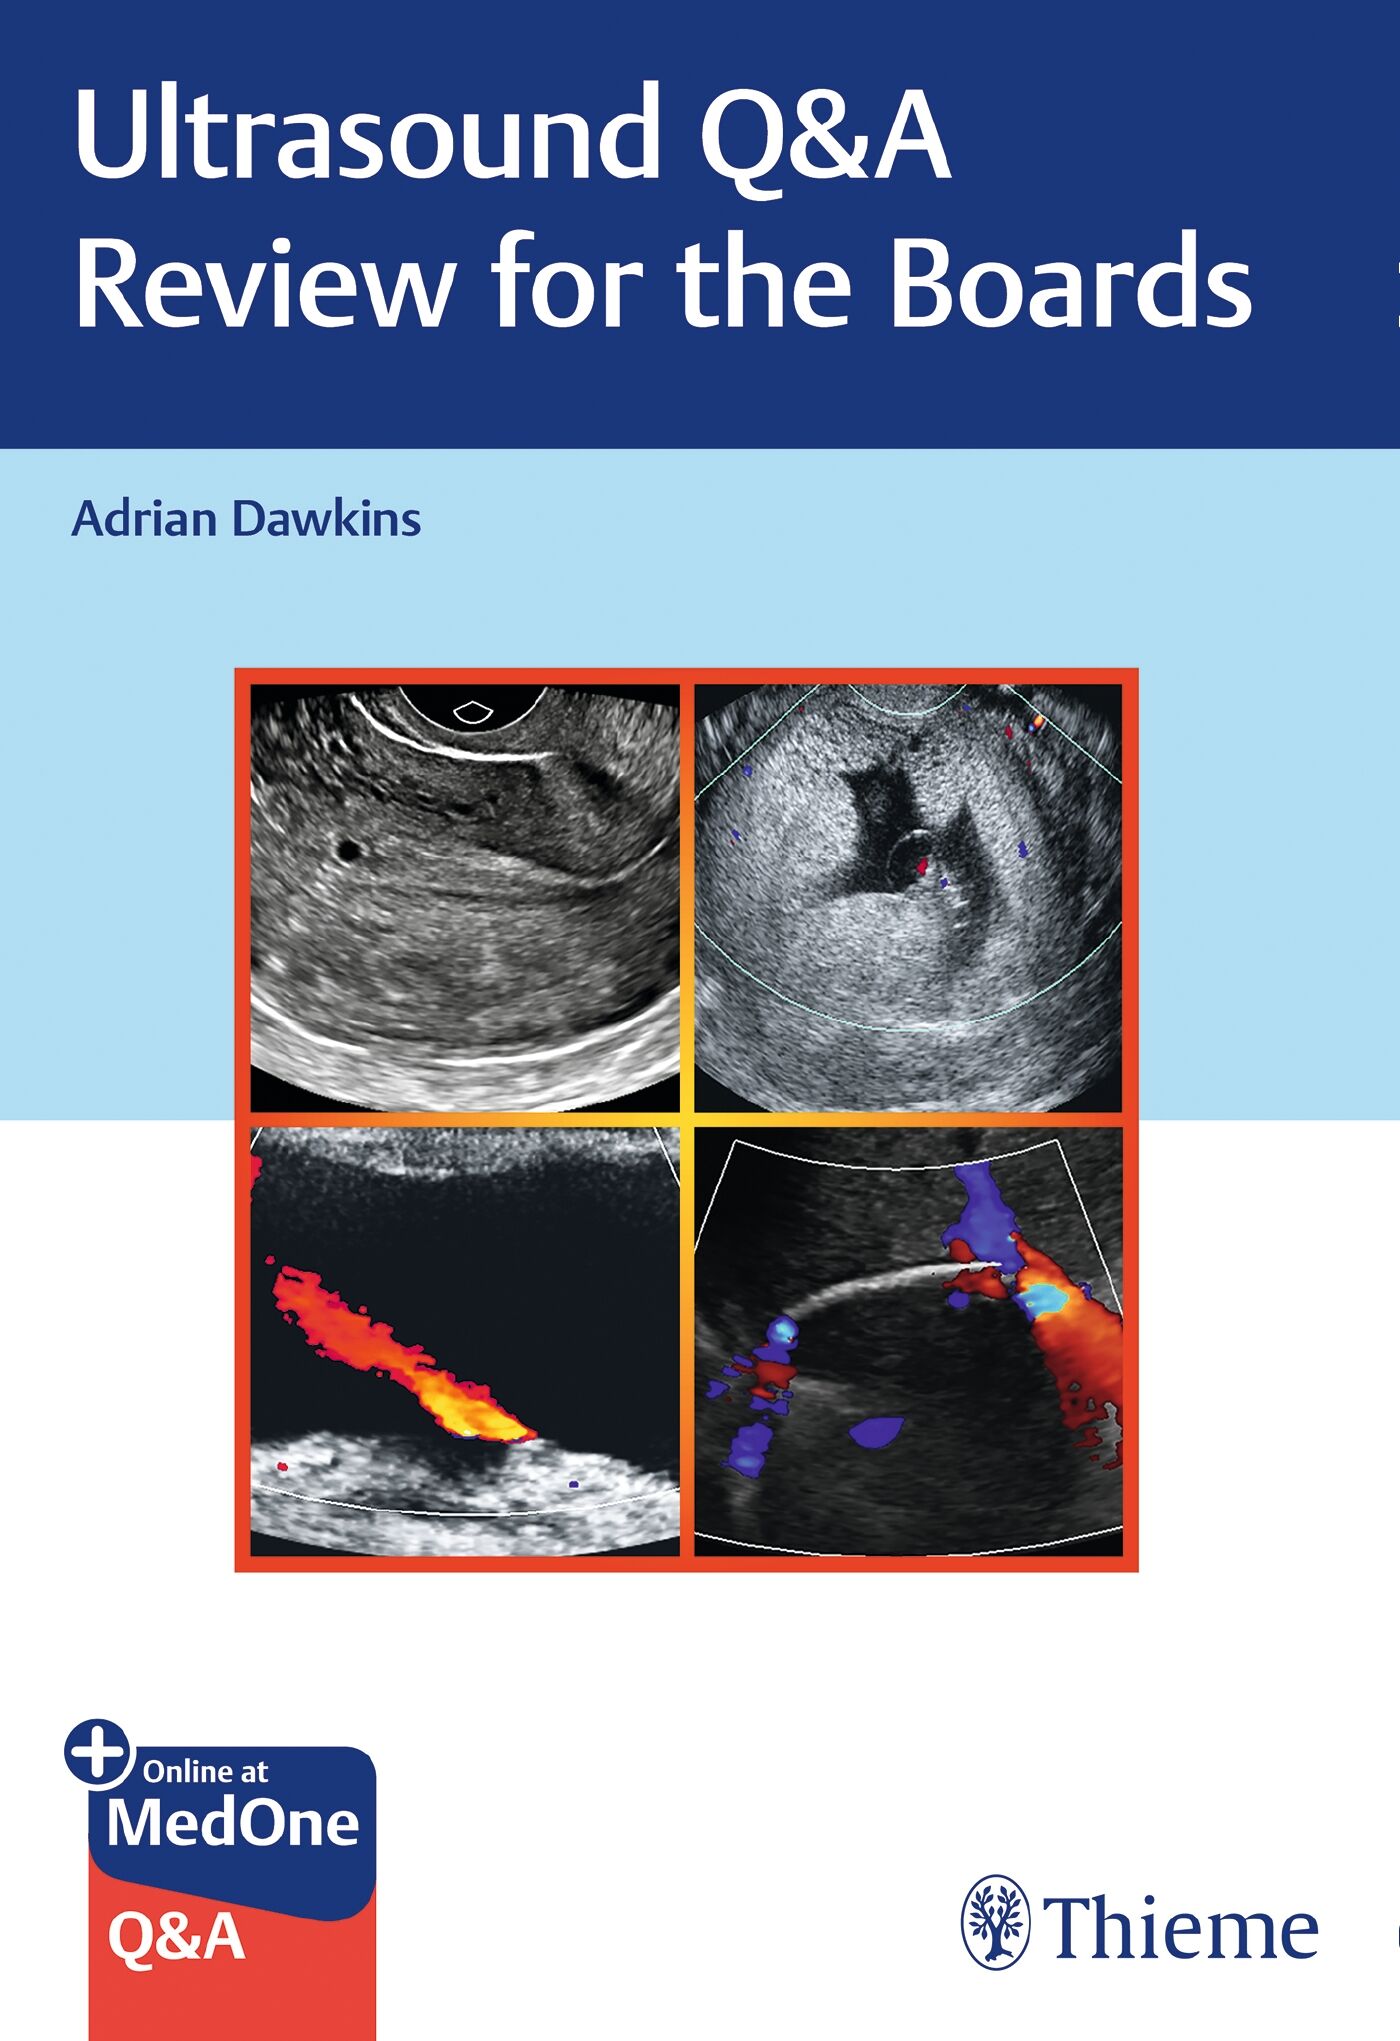 Ultrasound Q&A Review for the Boards, 9781626234857